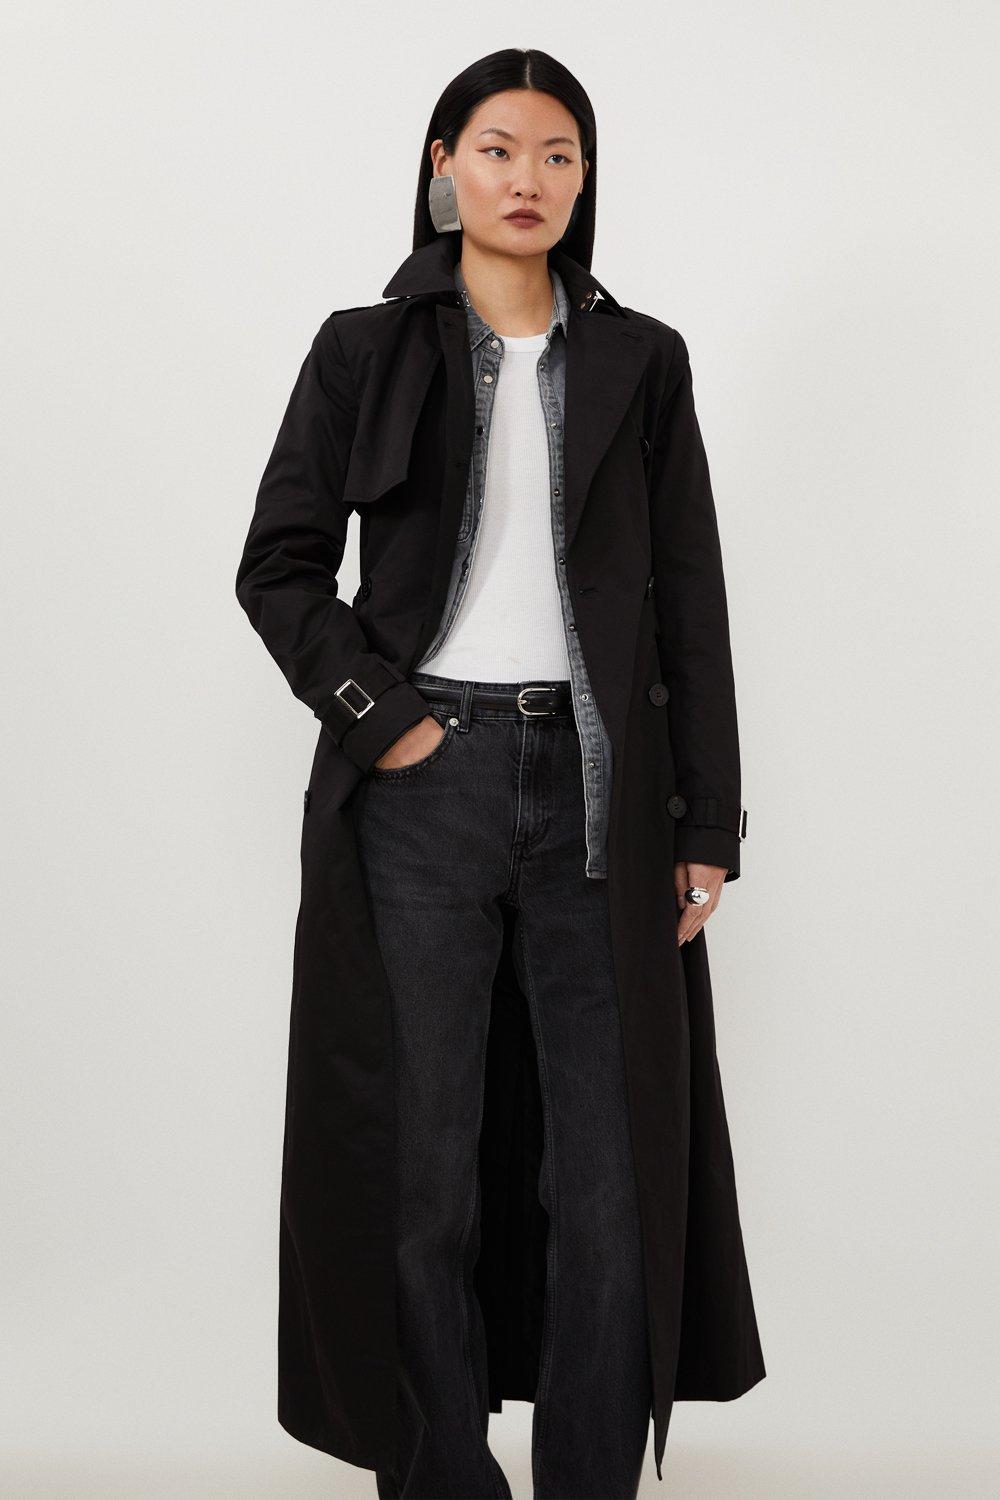 Tailored Classic Belted Trench Coat